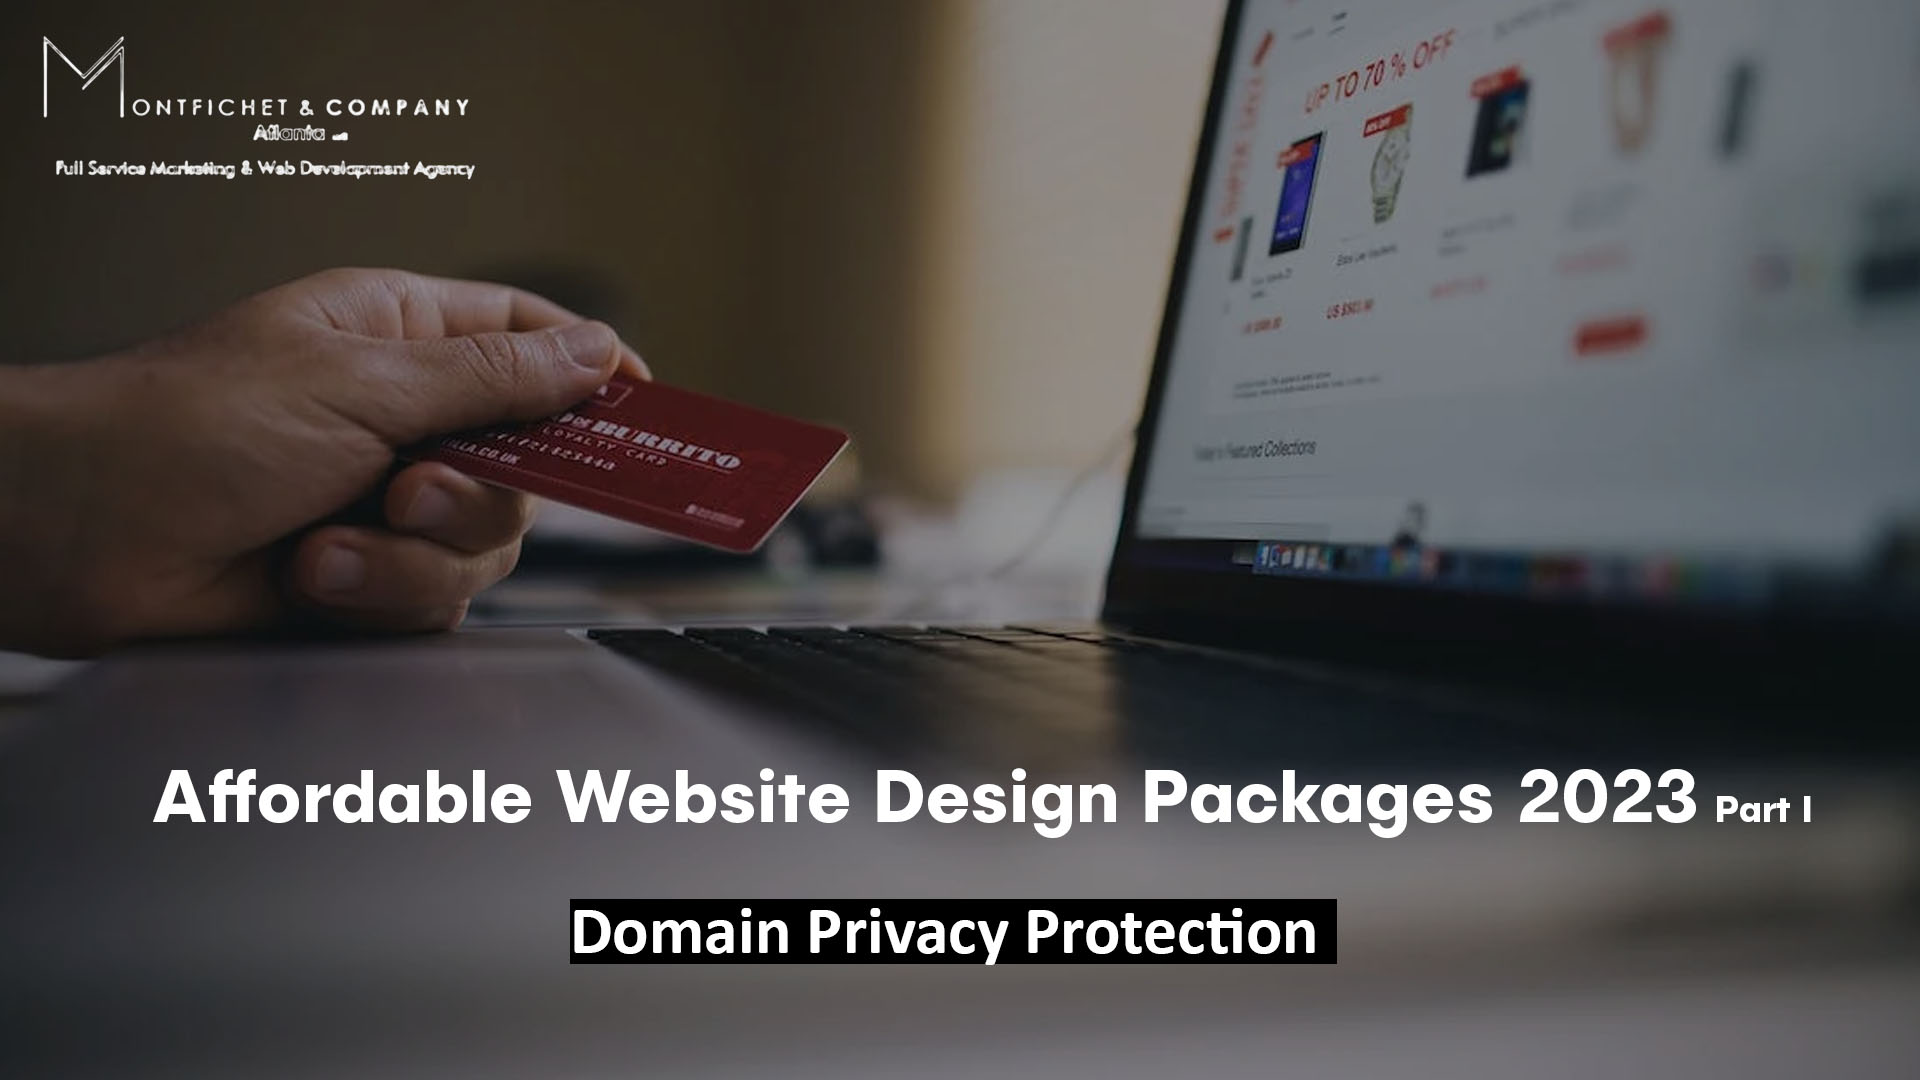 Domain Privacy Protection  